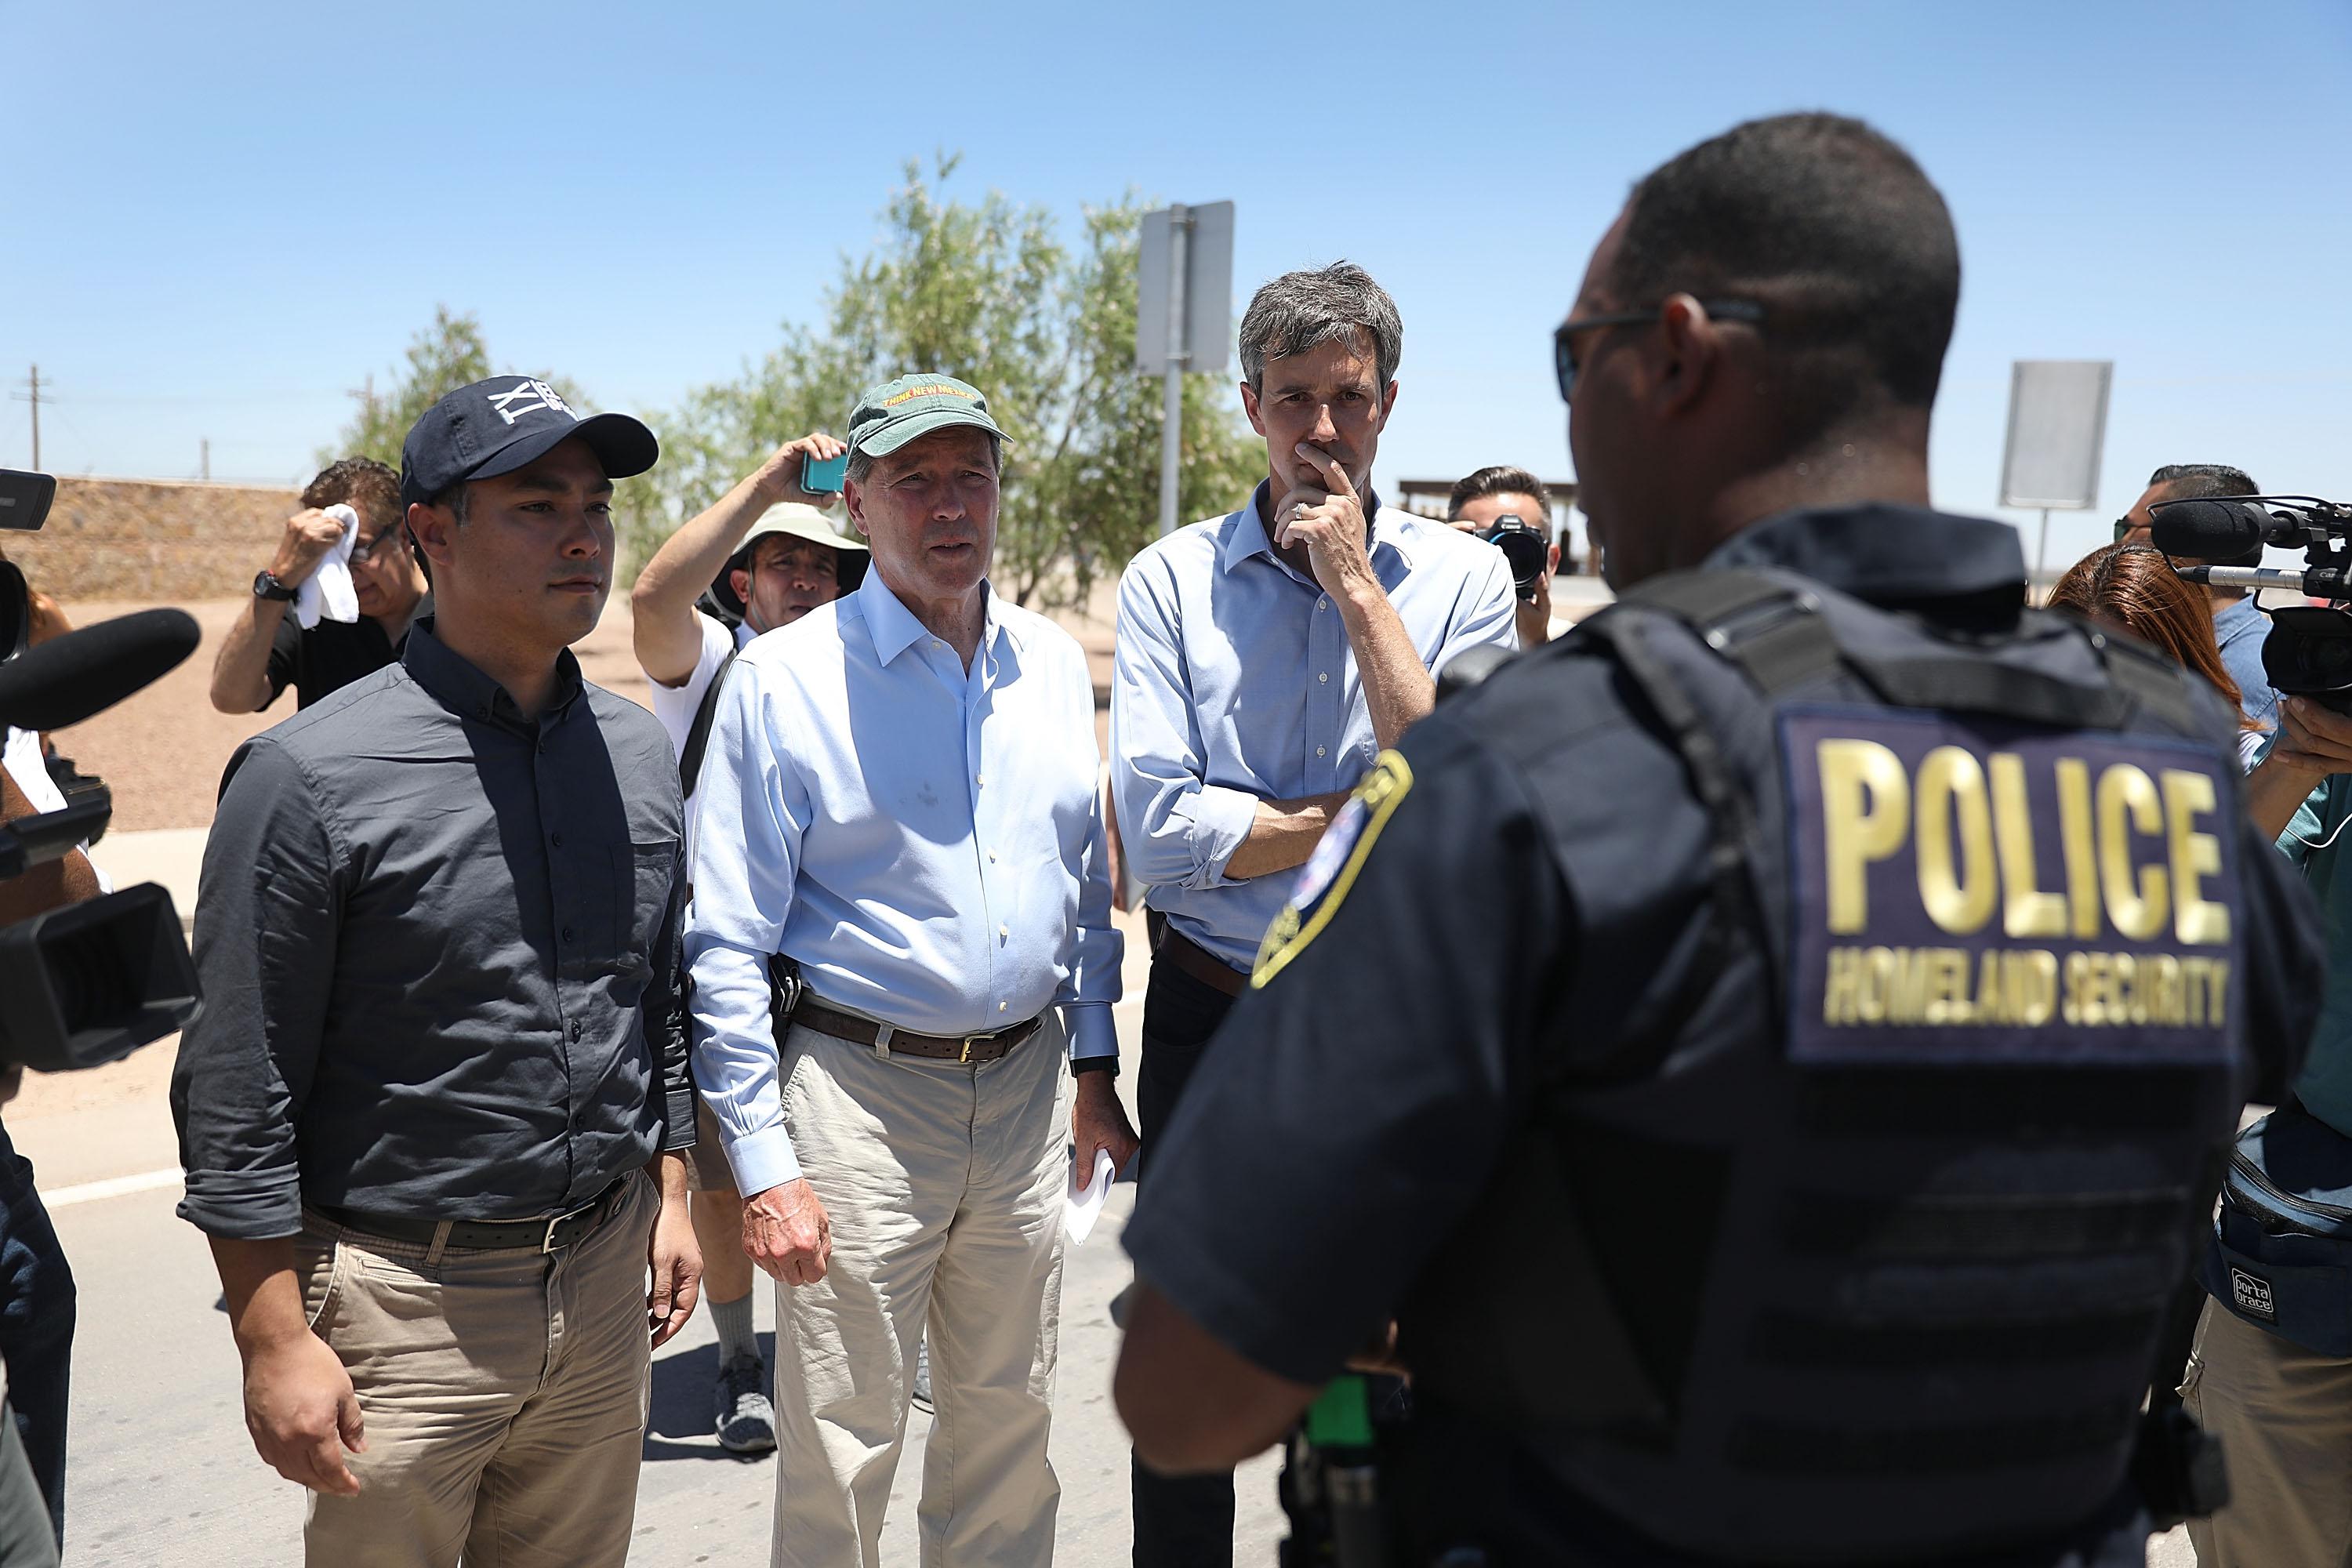 Rep. Joaquin Castro (D-TX), U.S. Senator Tom Udall (D-NM) and Rep. Beto O'Rourke (D-TX)(L-R) are briefed by a Department of Homeland Security police officer before touring a tent encampment near the Tornillo-Guadalupe Port of Entry on June 23, 2018 in Tornillo, Texas. 